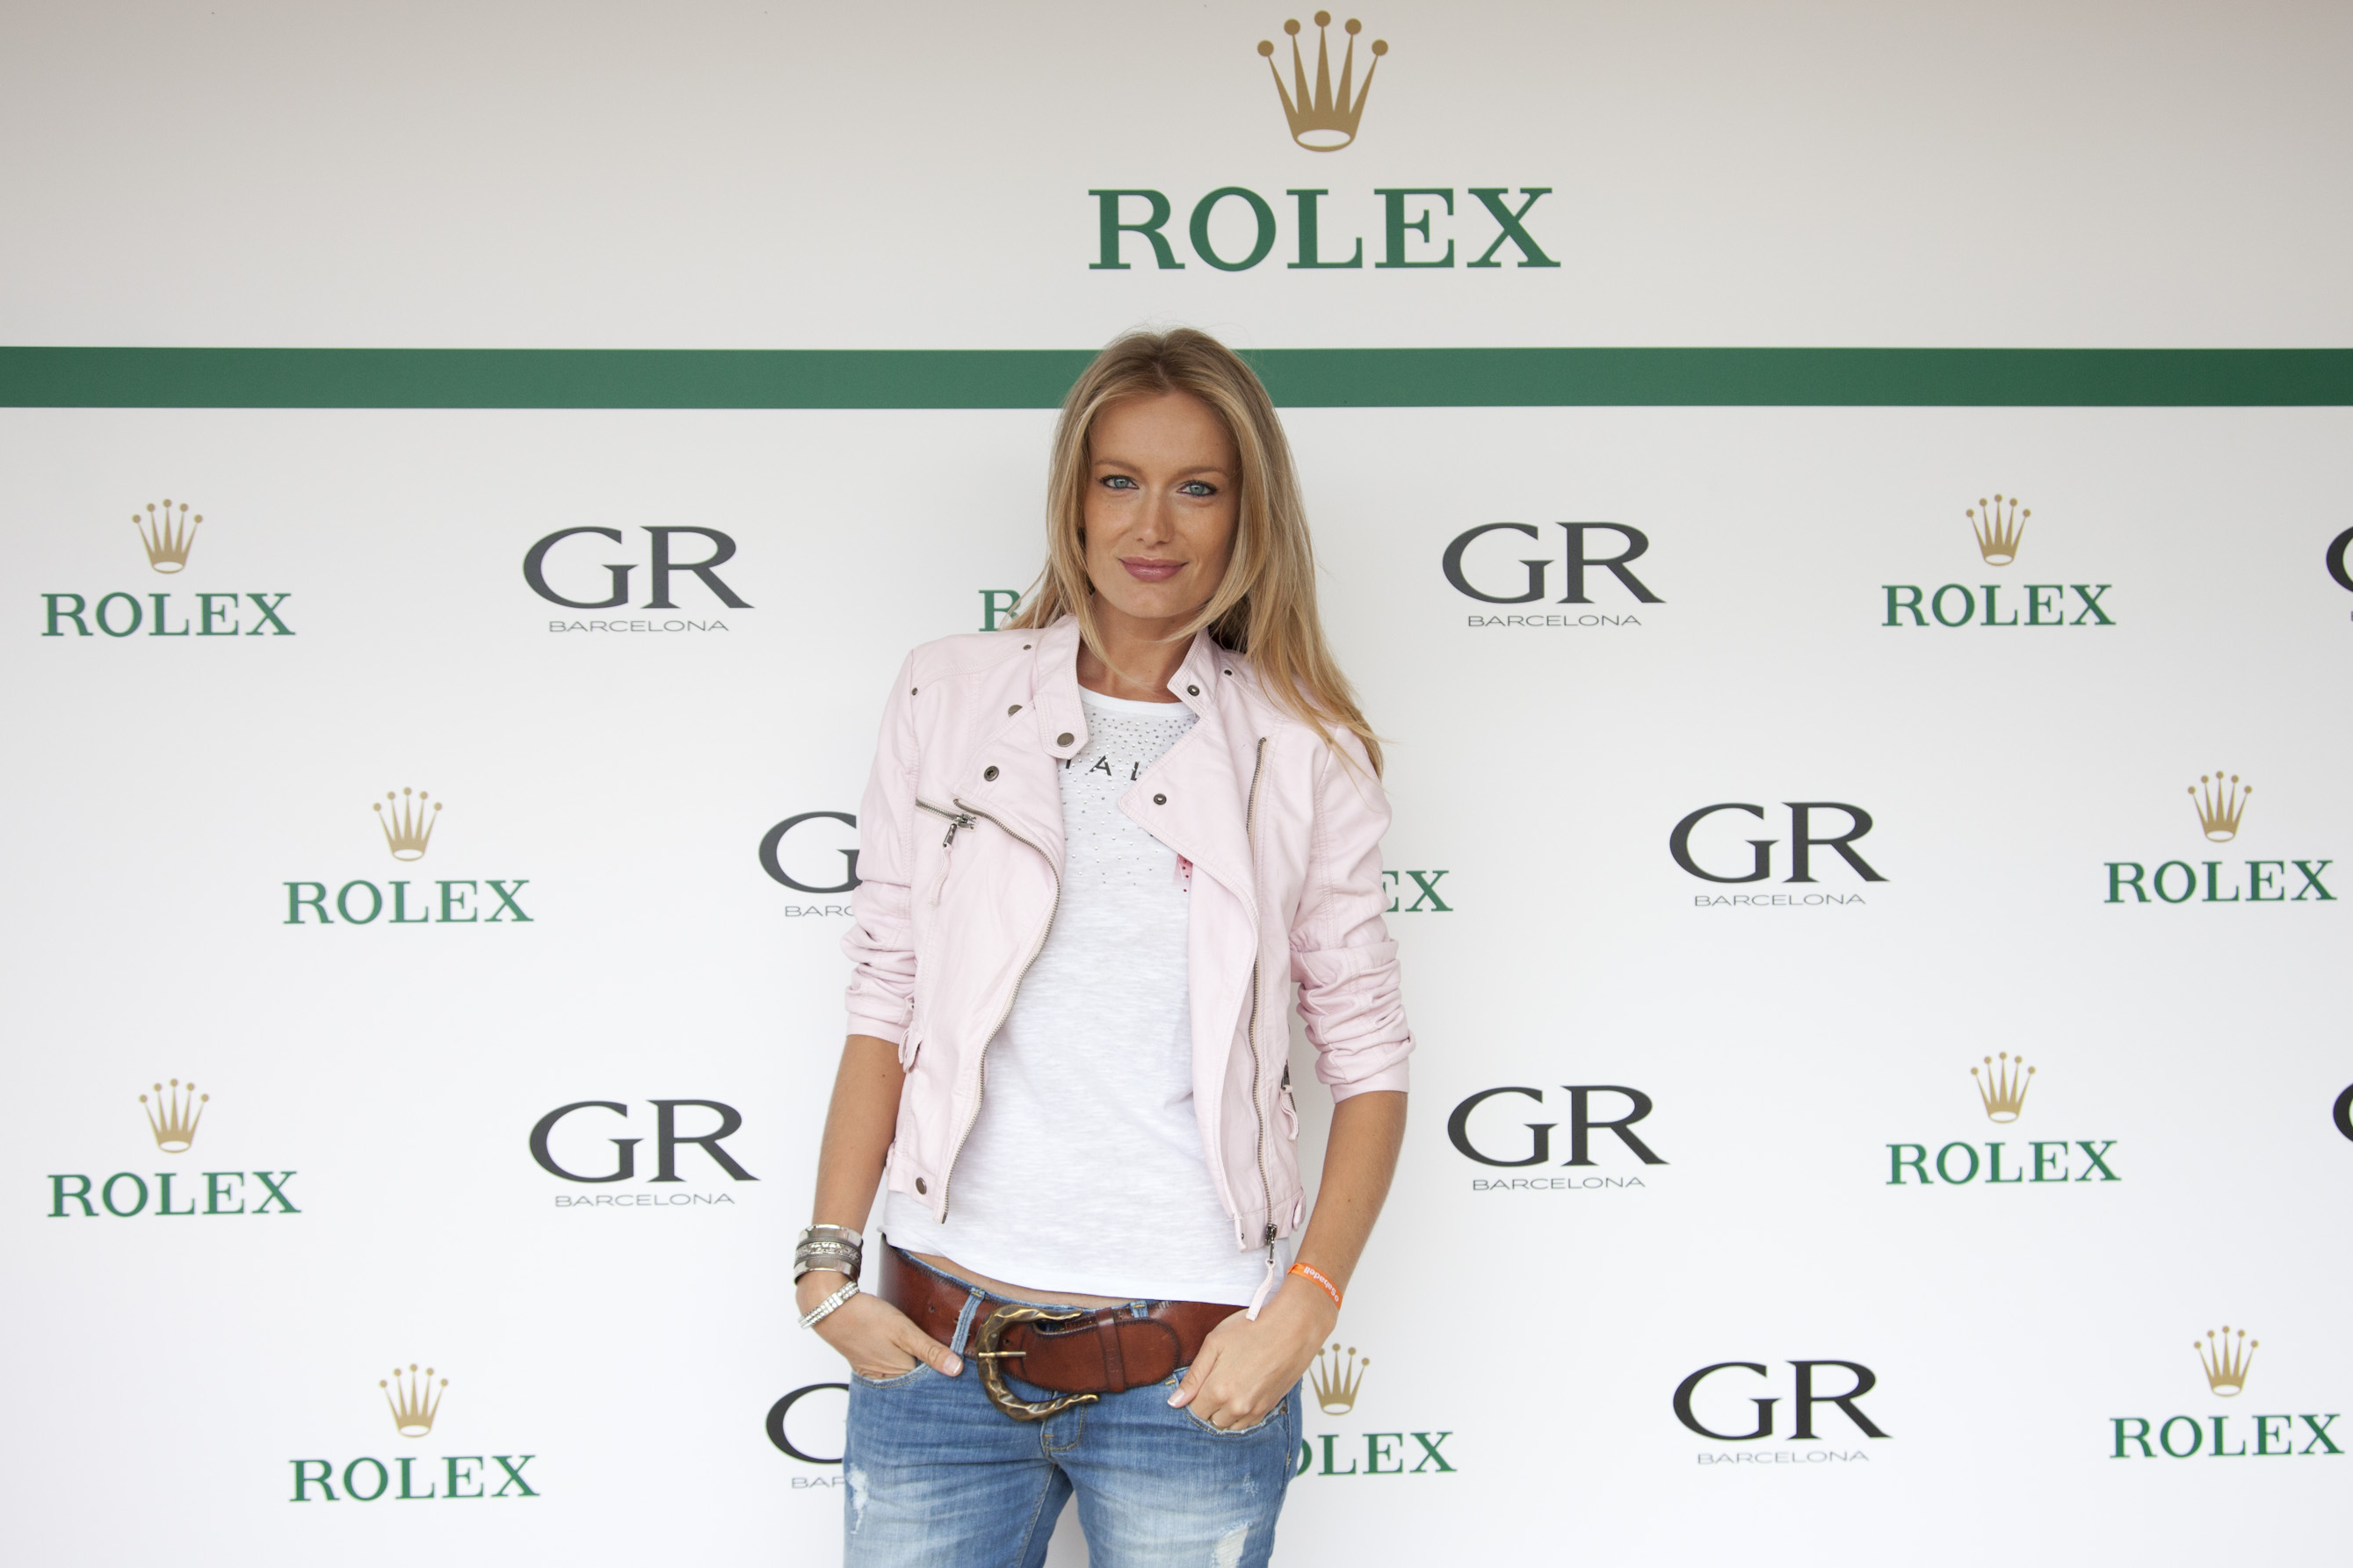 "Surrounded by luxury at Rolex/GR stand during Godó competition. "